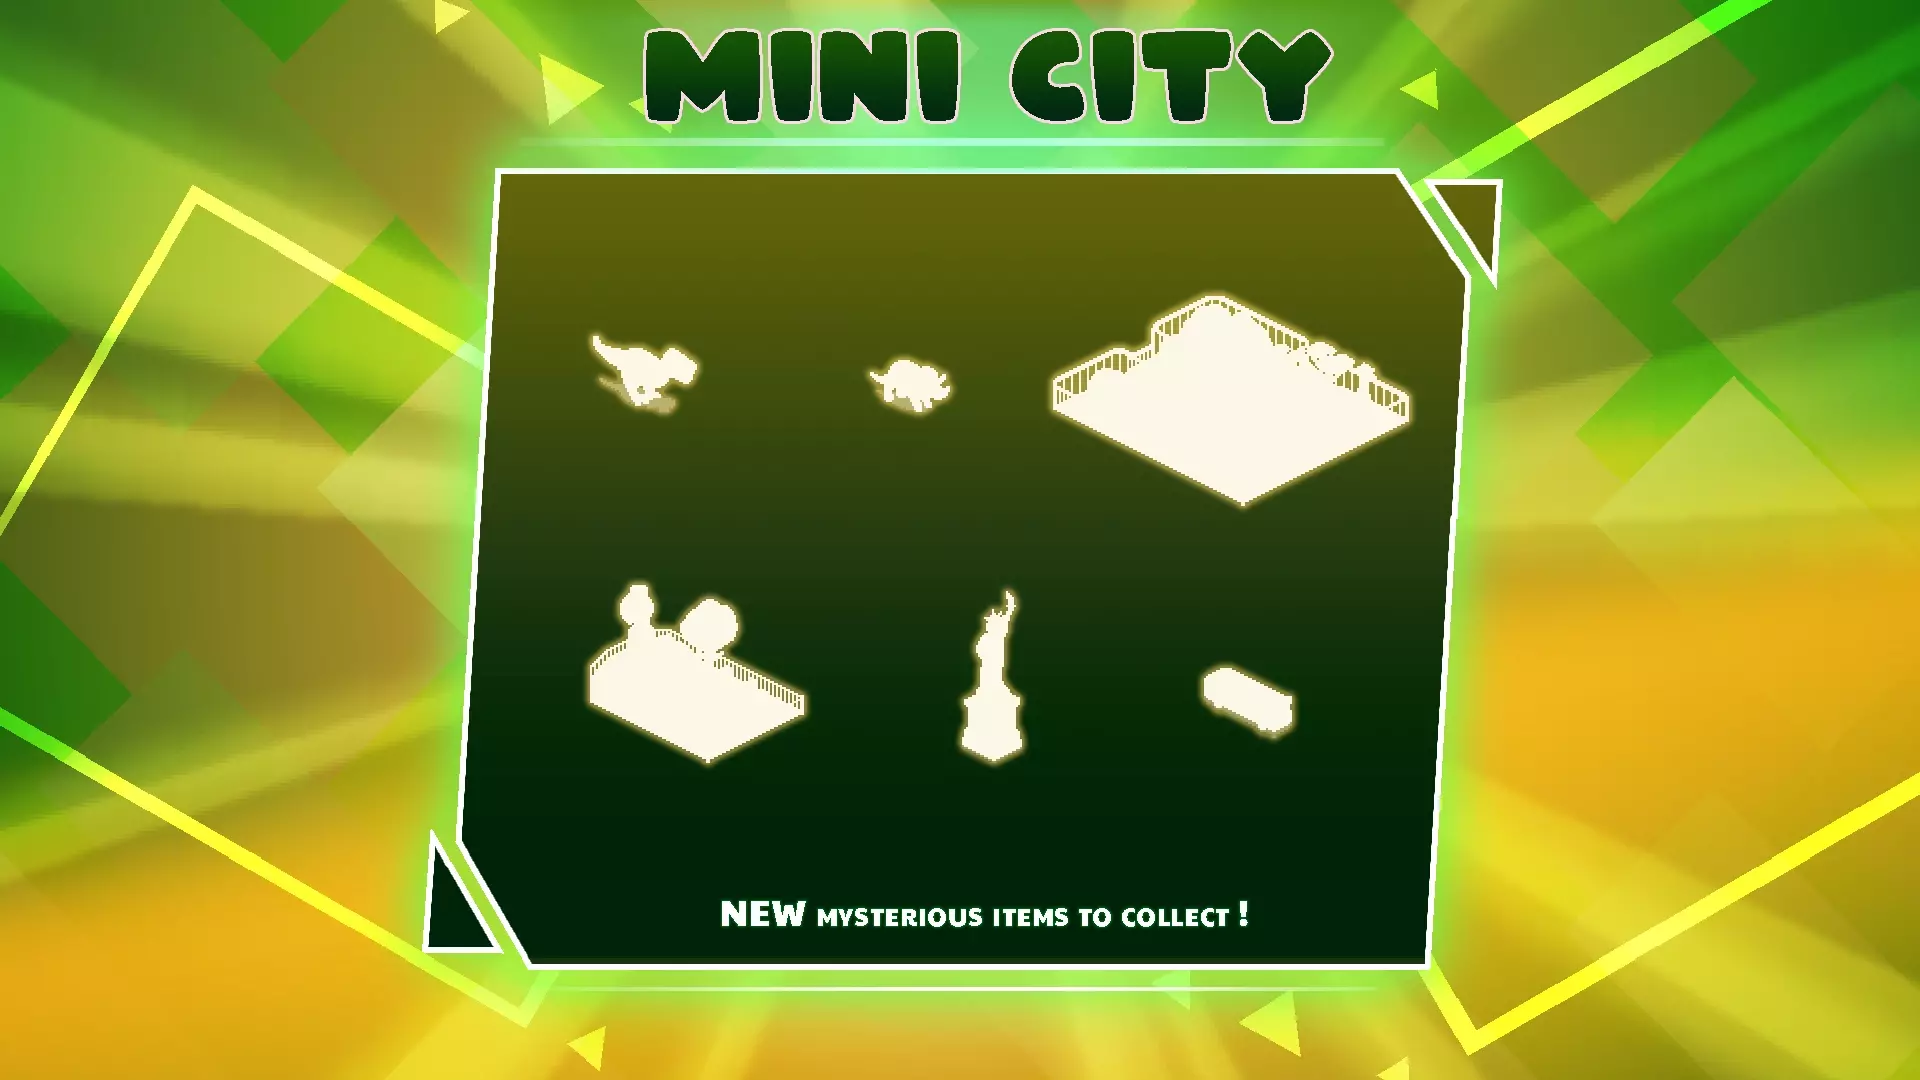 MiniCity Update, Collect new items!